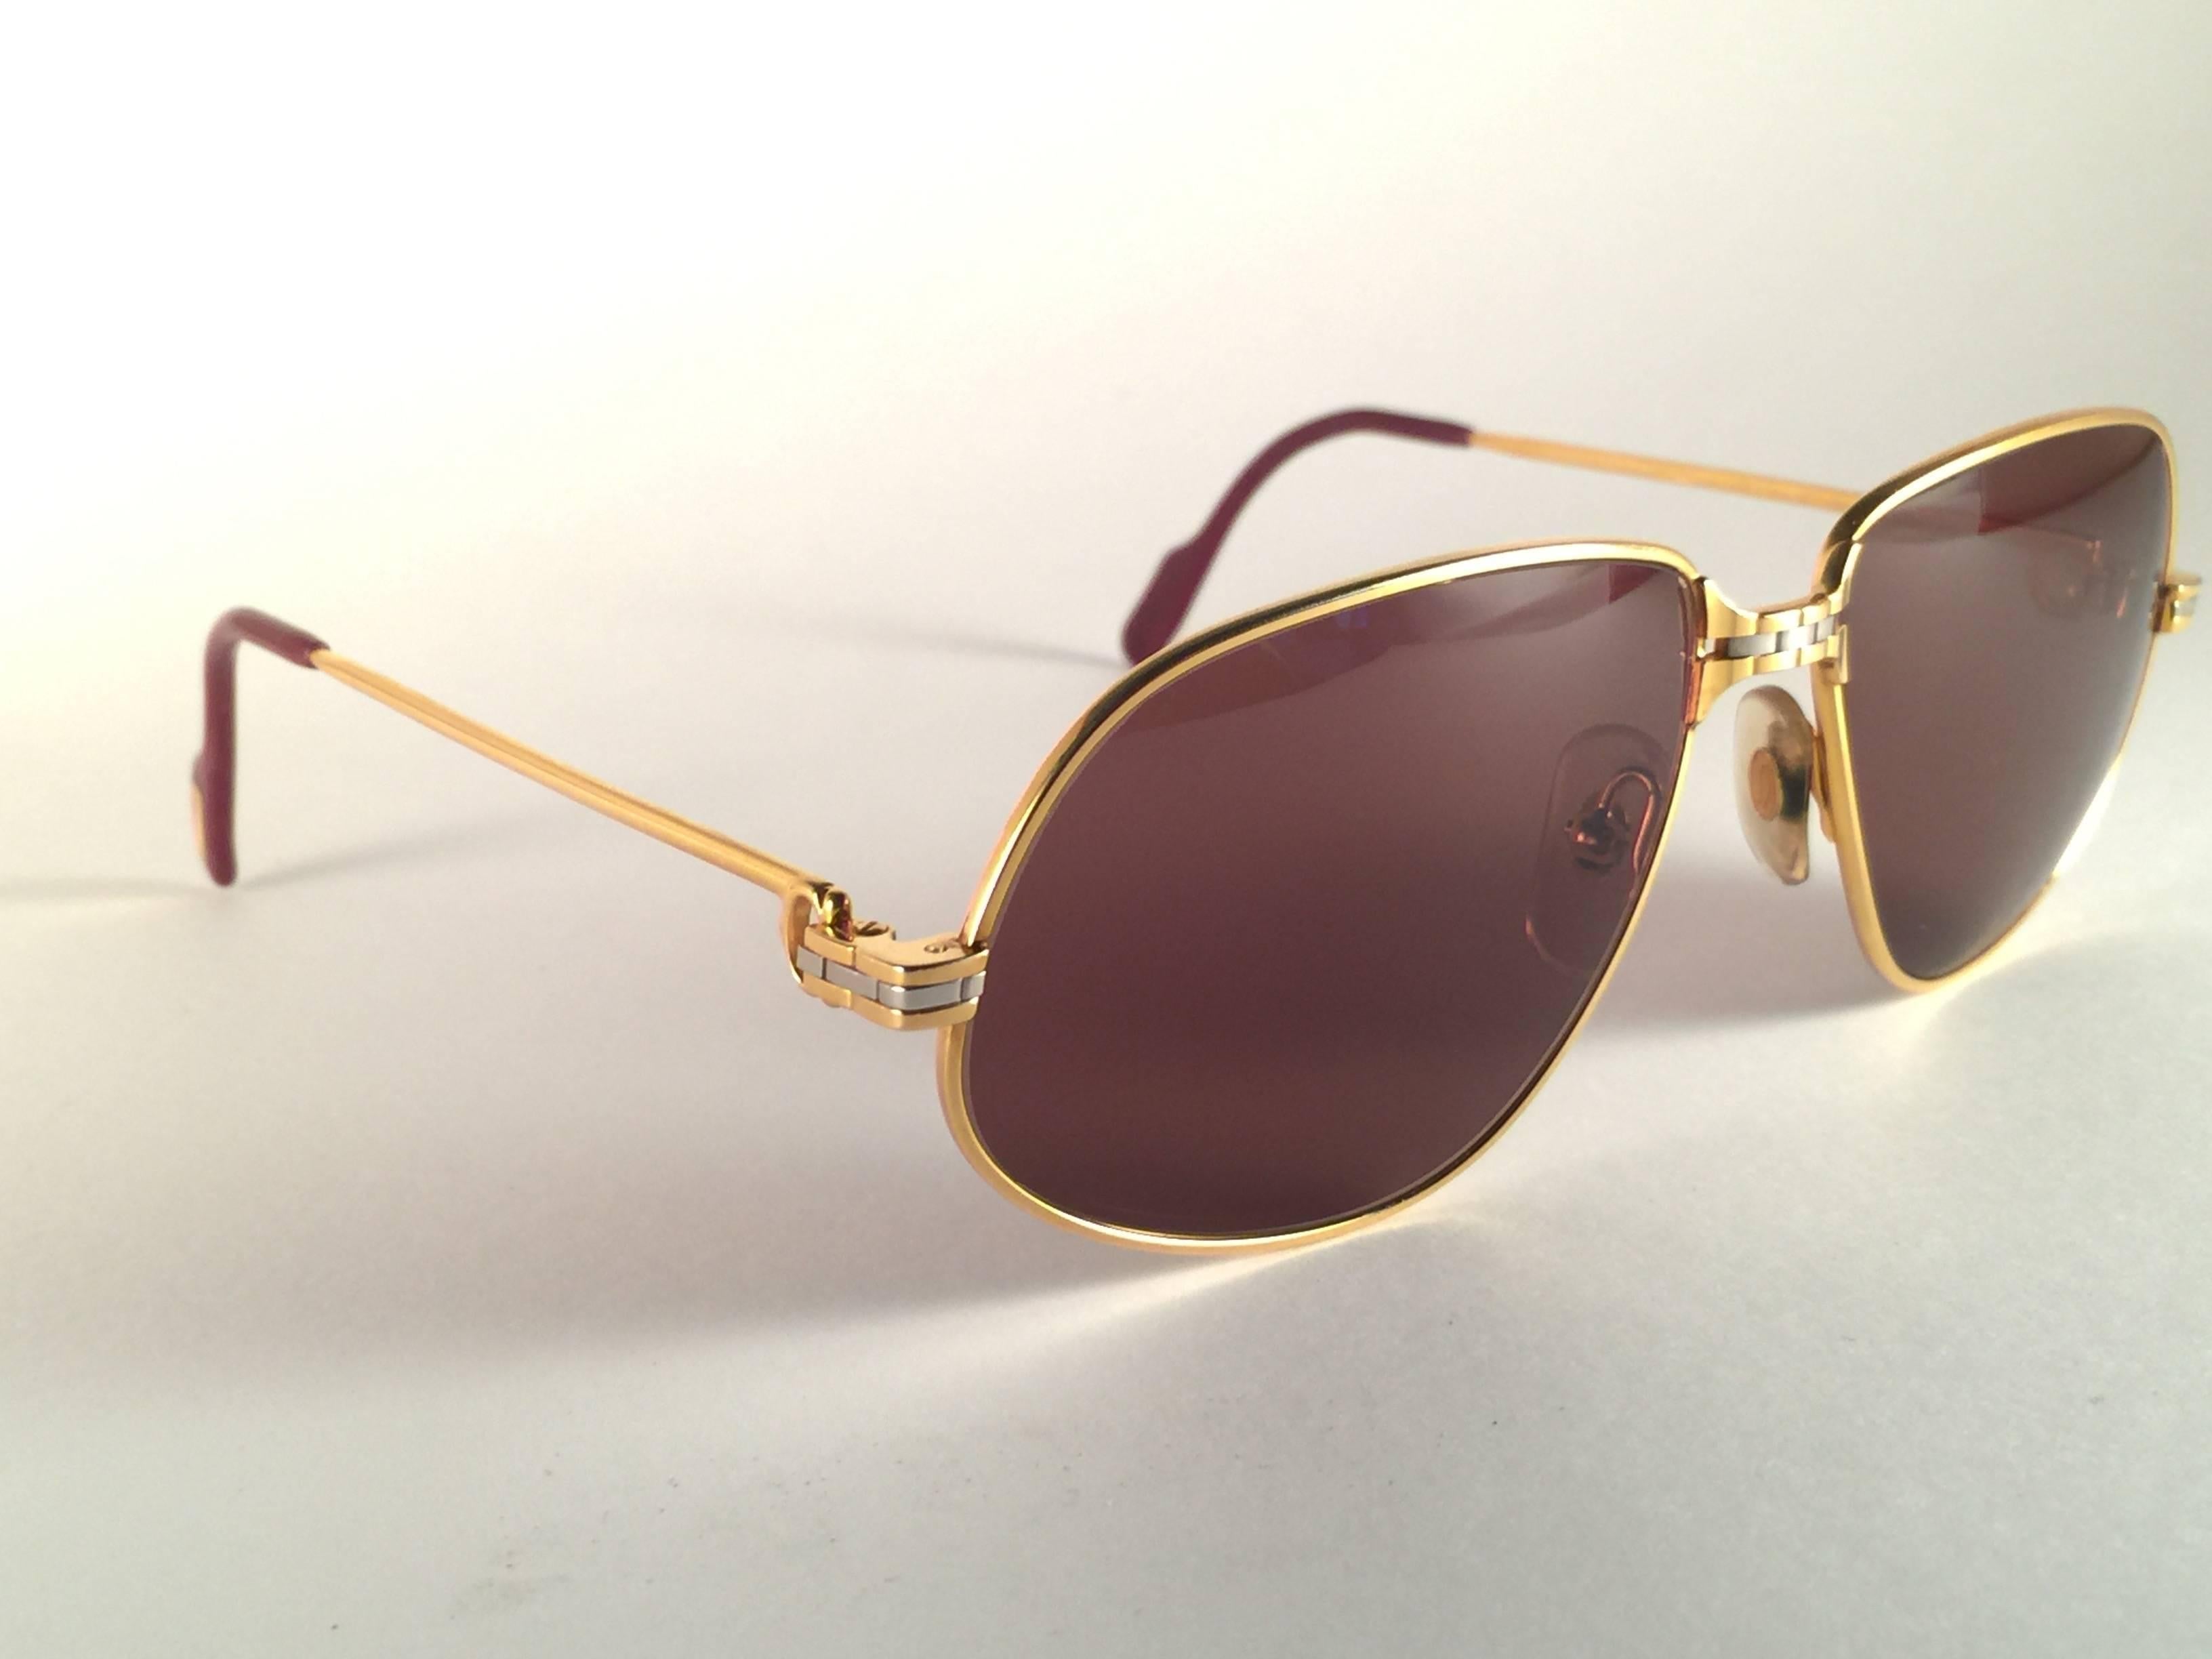 New Vintage Cartier Panthere 56mm Medium Sunglasses France 18k Gold Heavy Plated For Sale 1